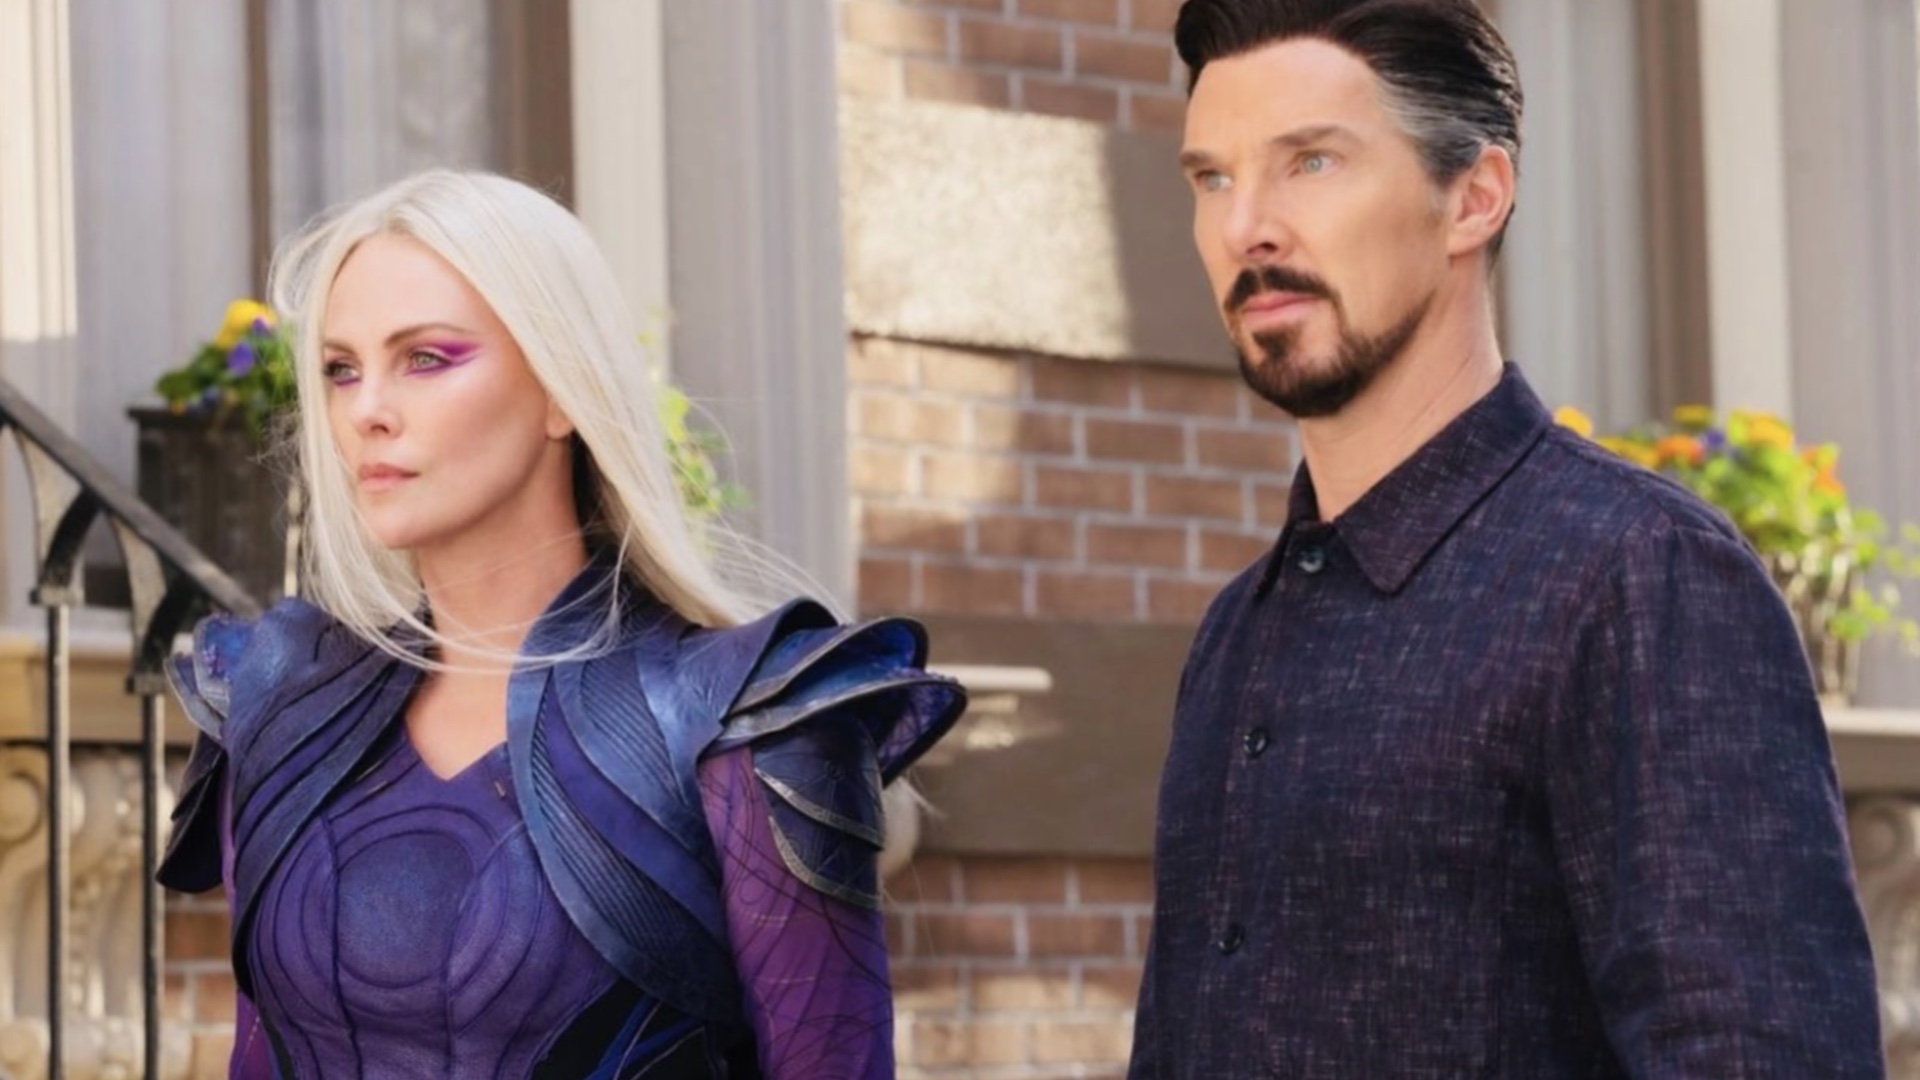 Charlize Theron as Clea in Doctor Strange in the Multiverse of Madness